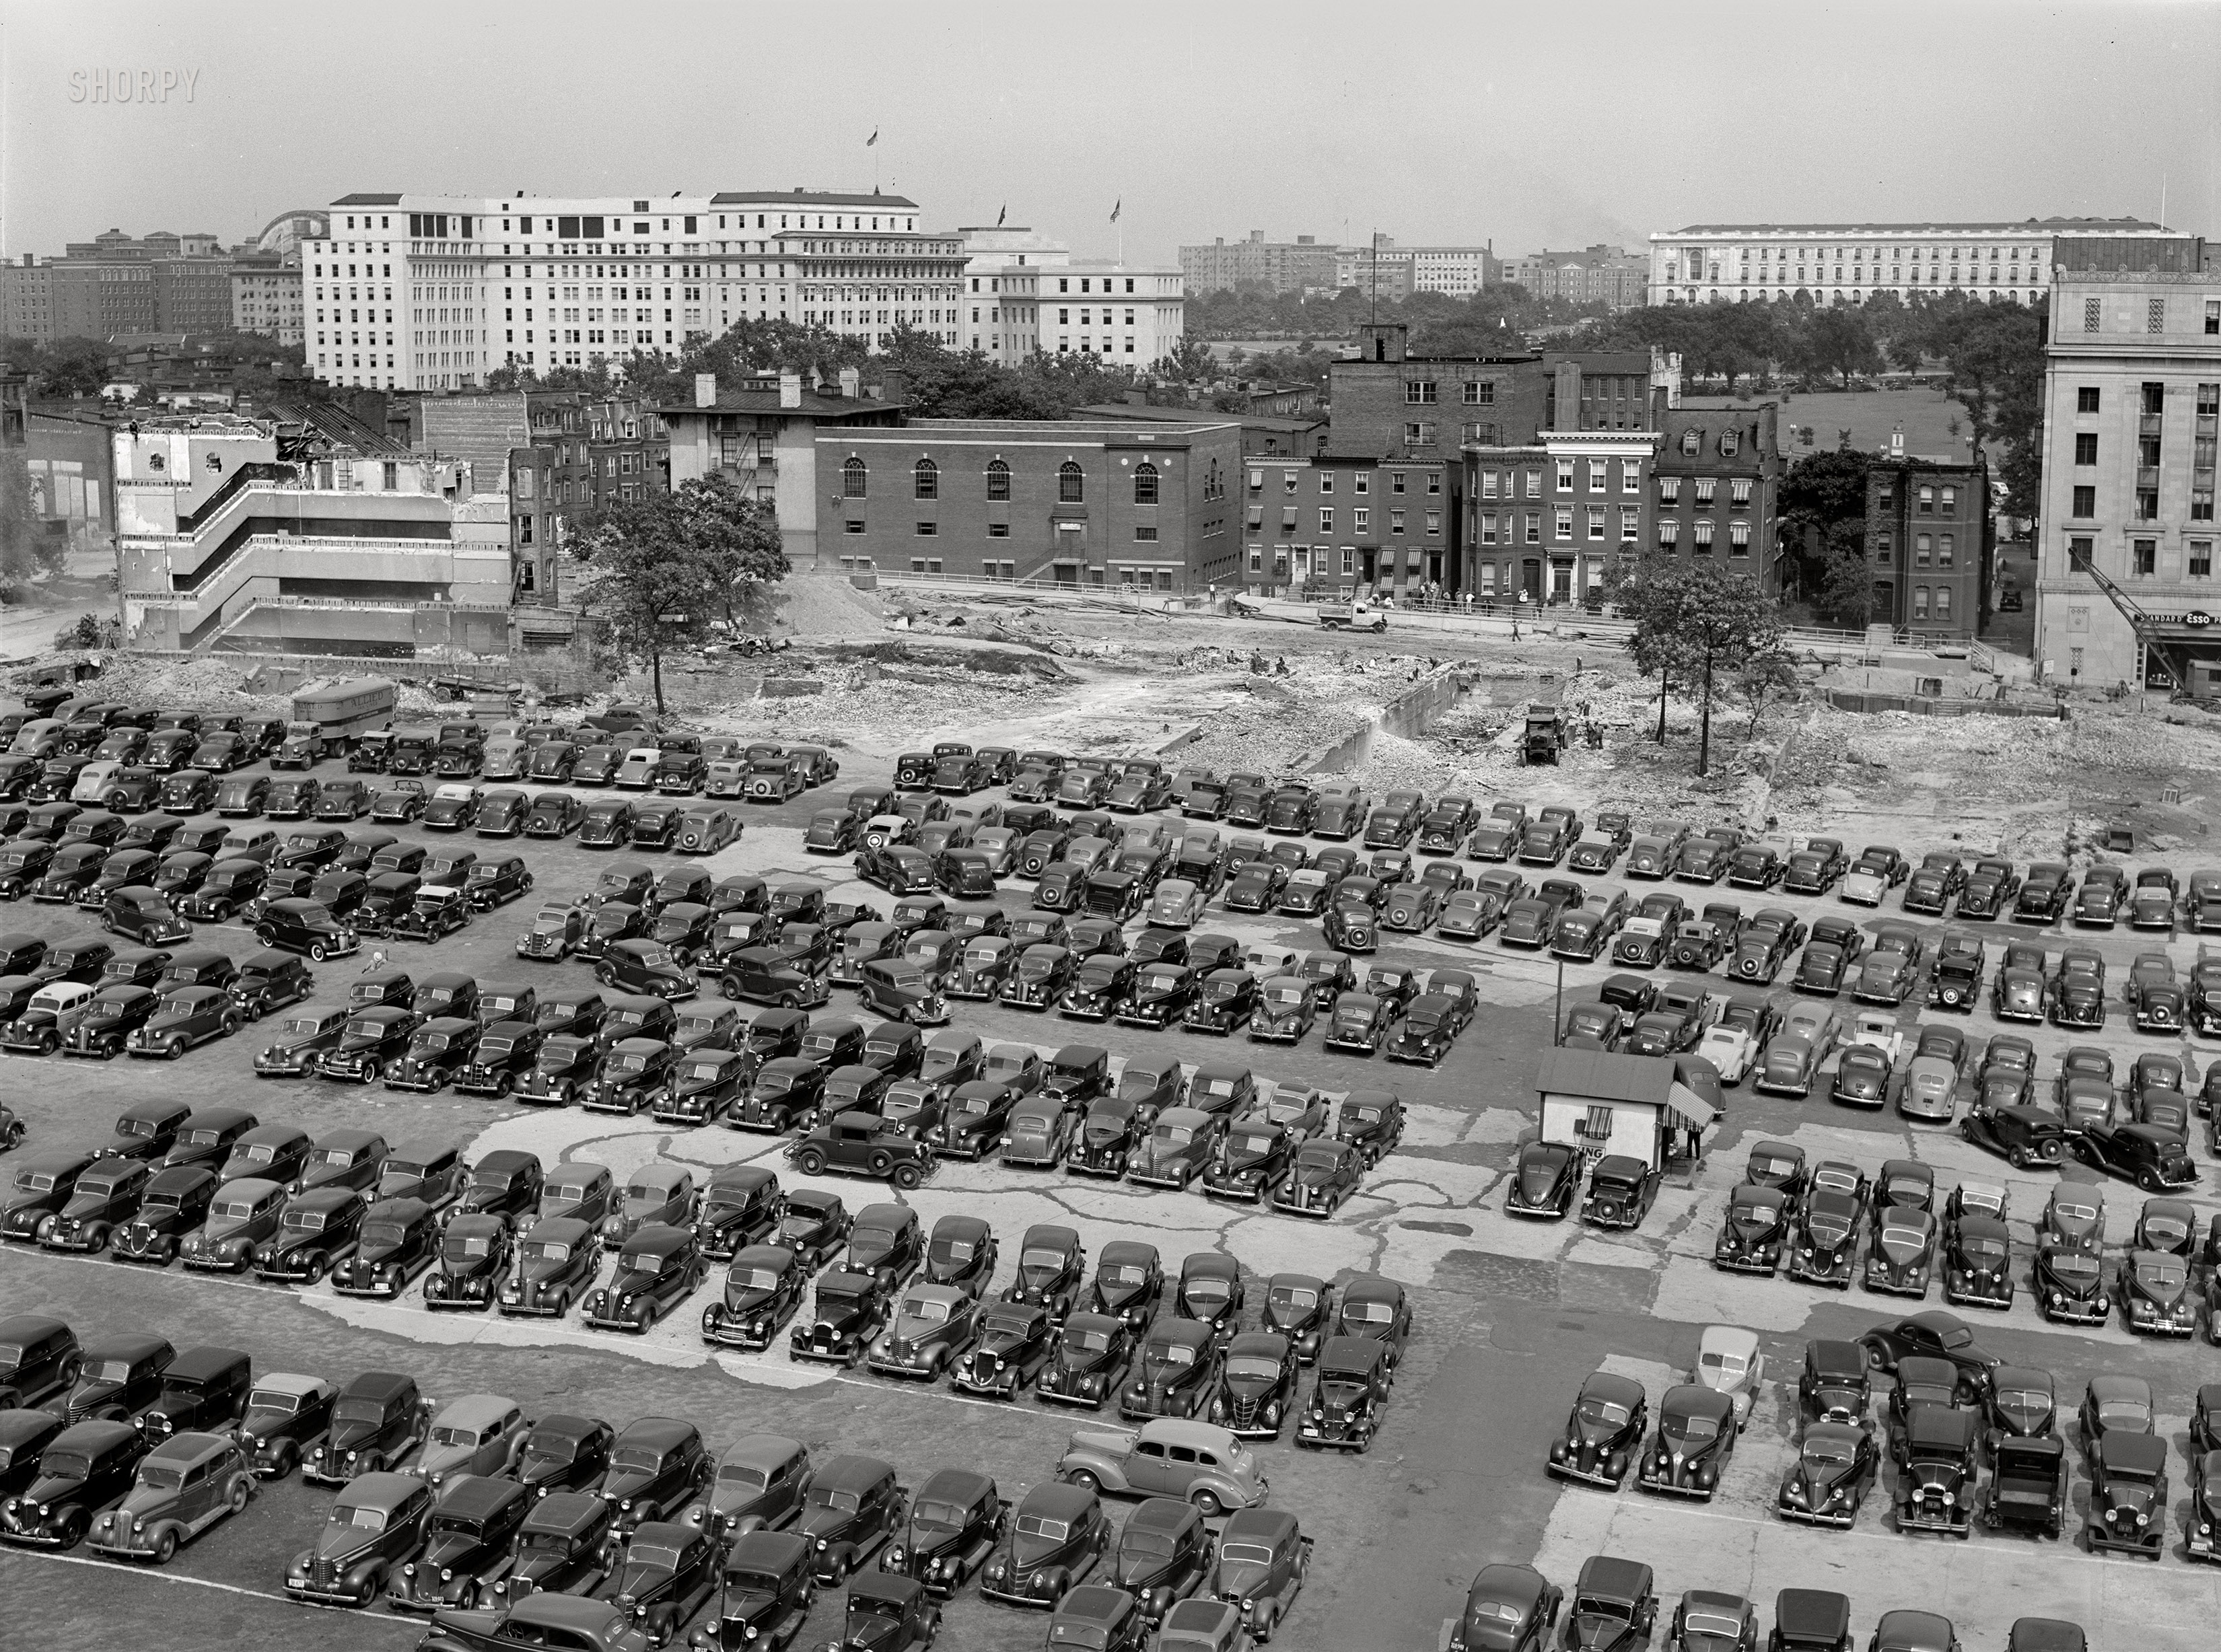 July 1939. Washington, D.C. "Parking lot for government employees, and buildings being torn down to make room for parking lot." Medium format negative by John Vachon. View full size.